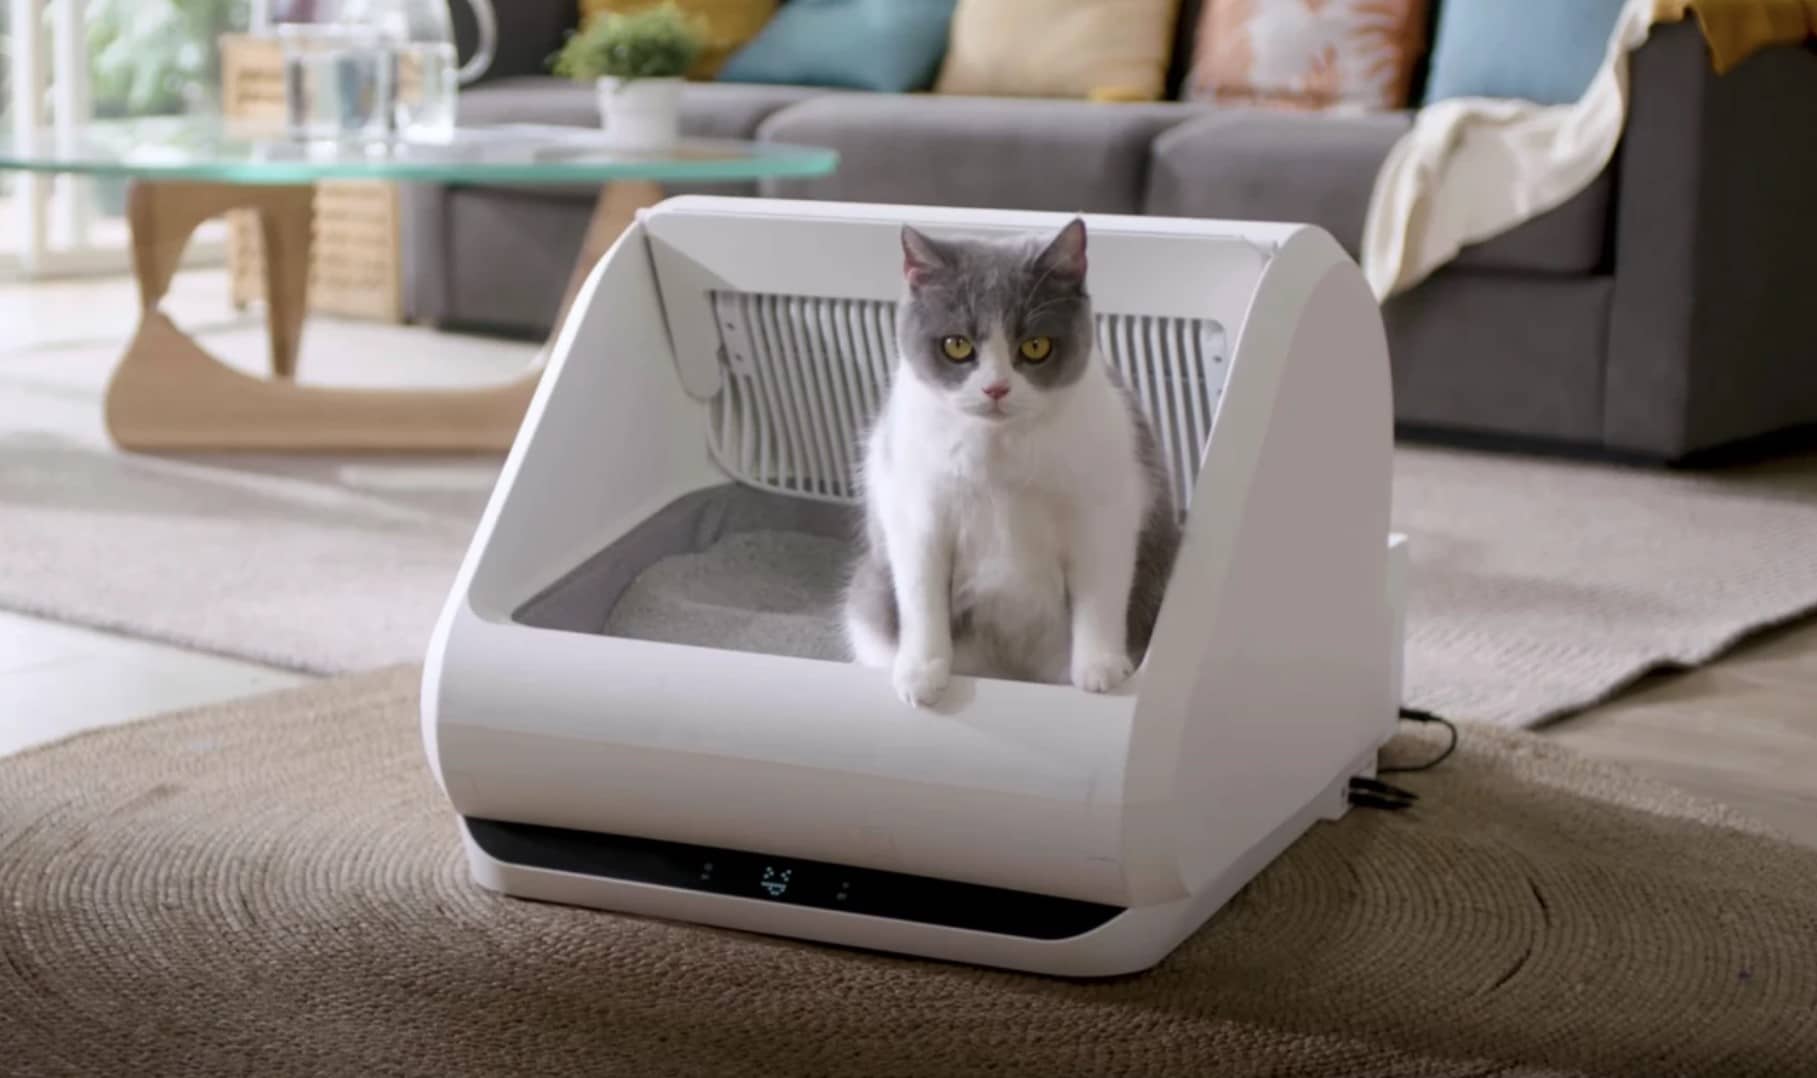 The automatically cleaning Popur X5 litter box frees cats from unpleasant duties